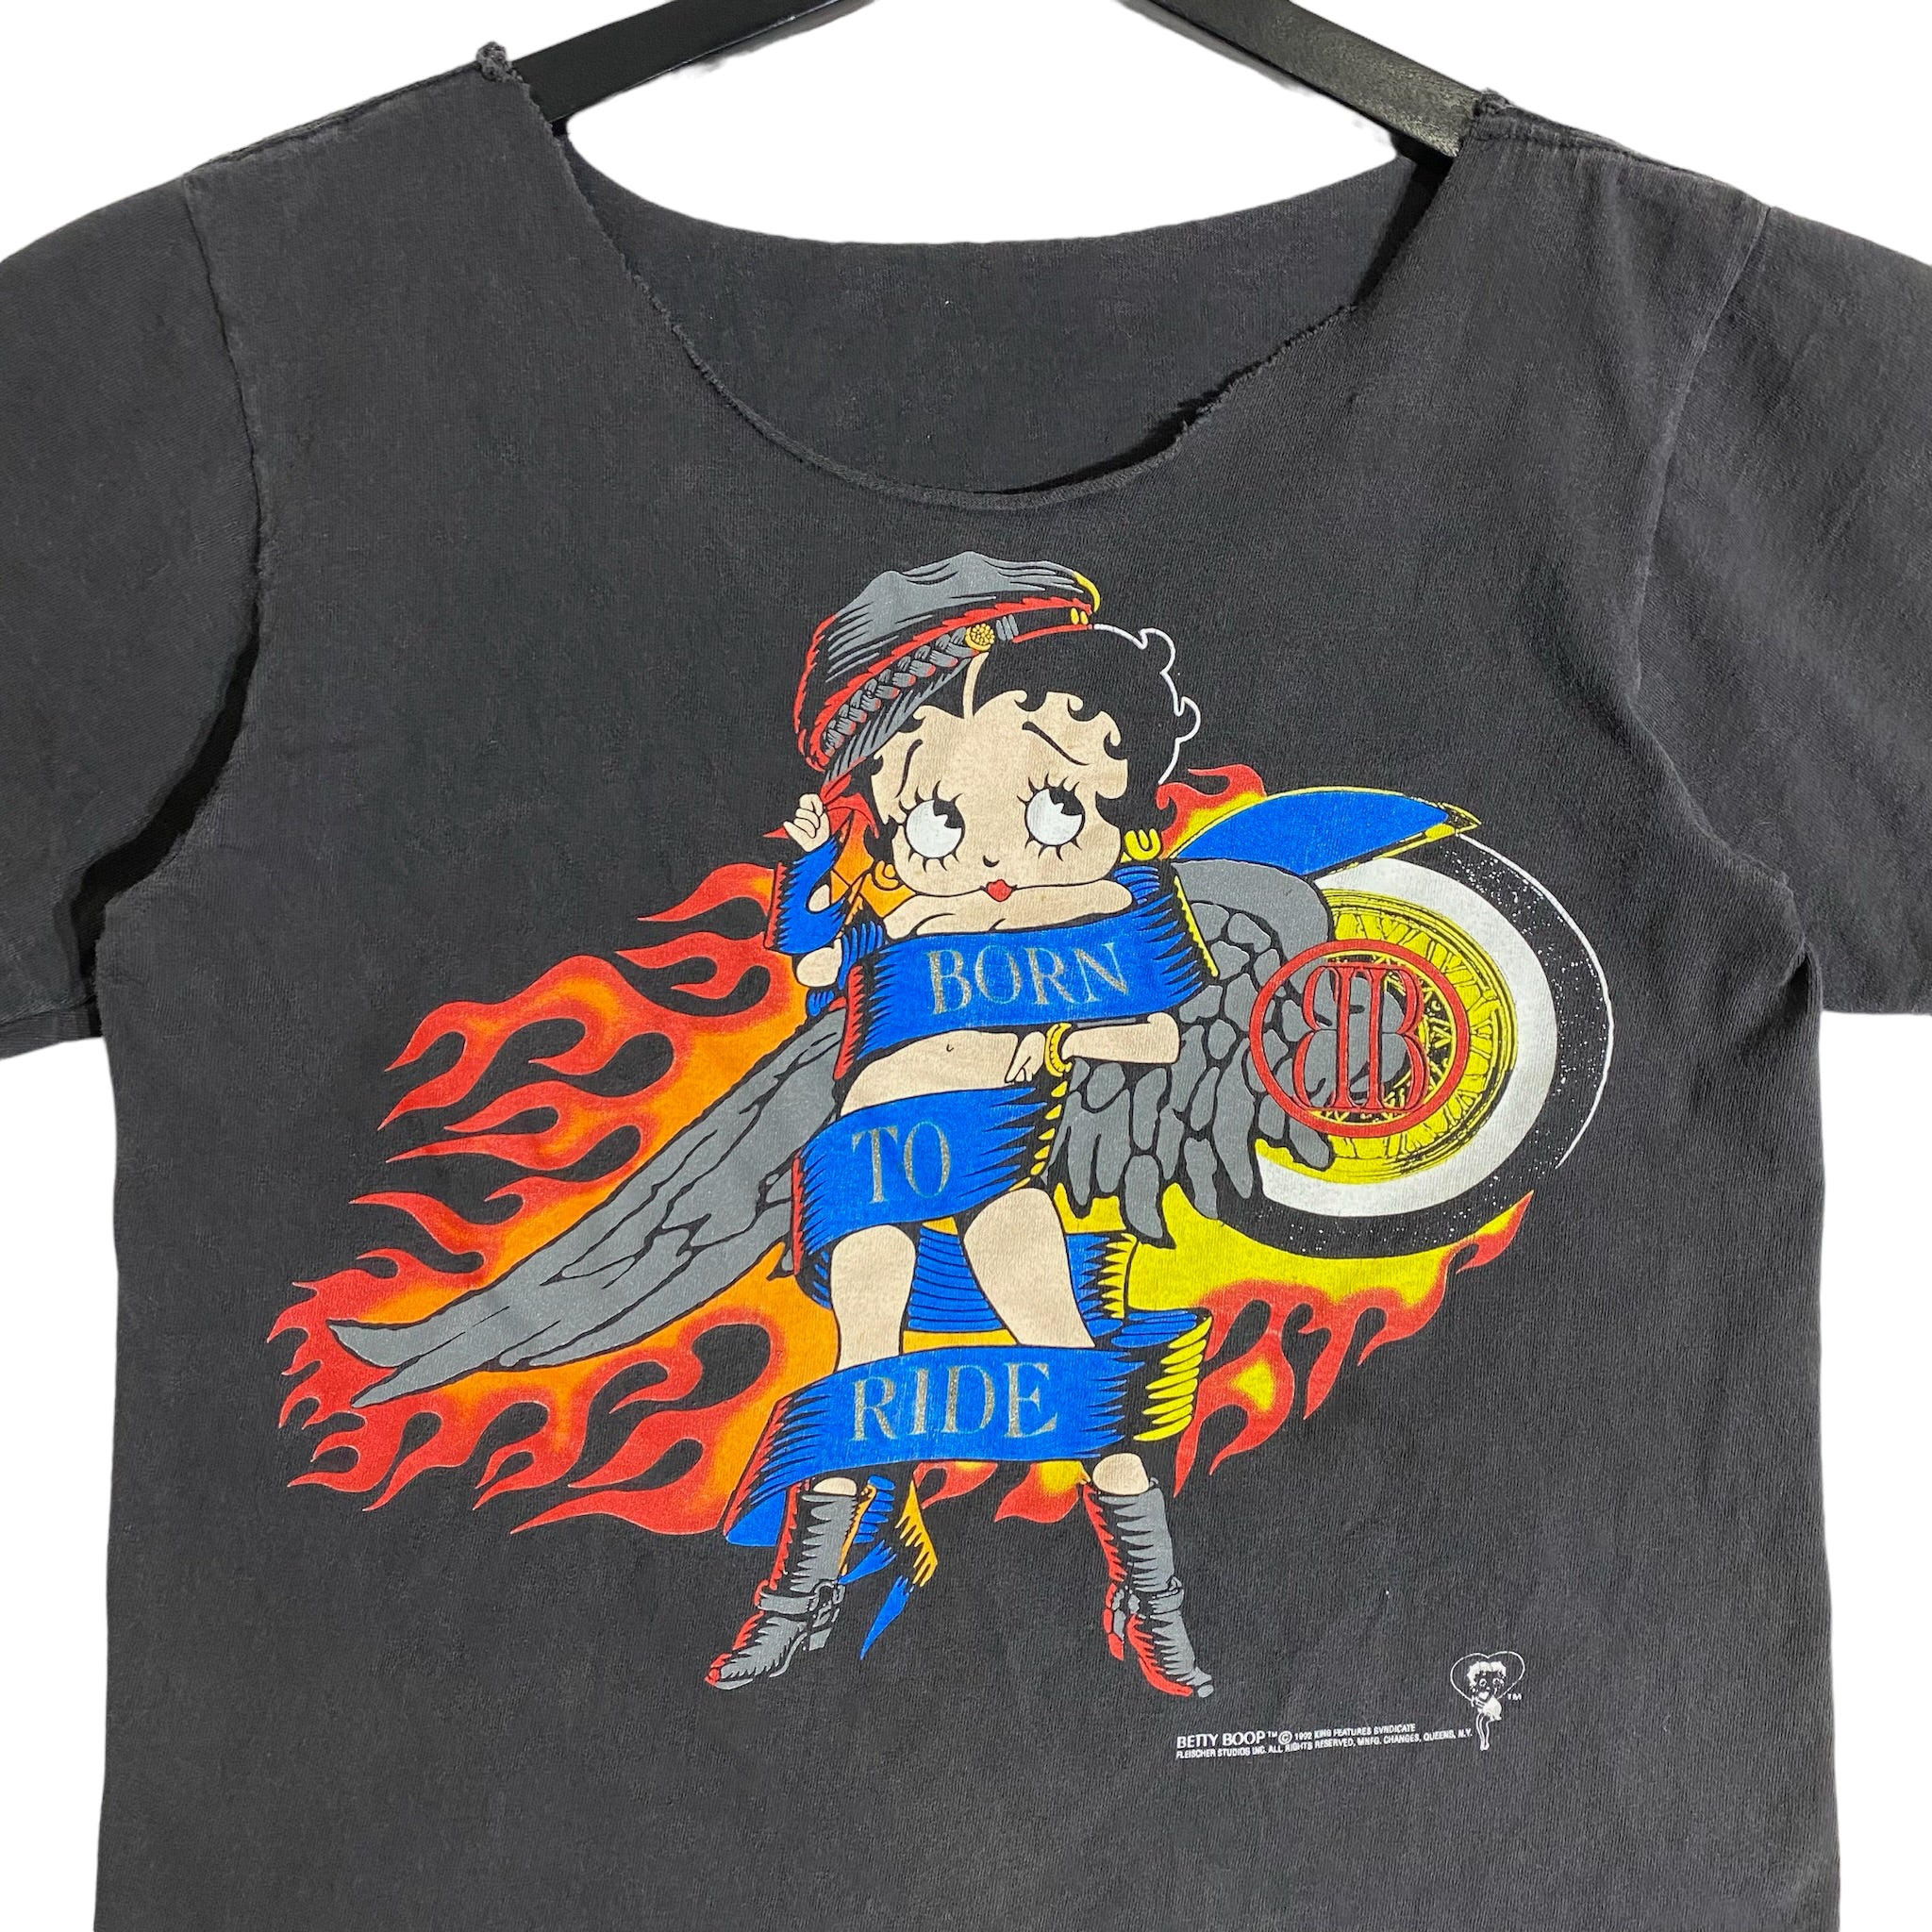 Vintage Betty Boop "Born To Ride" Shirt 1992